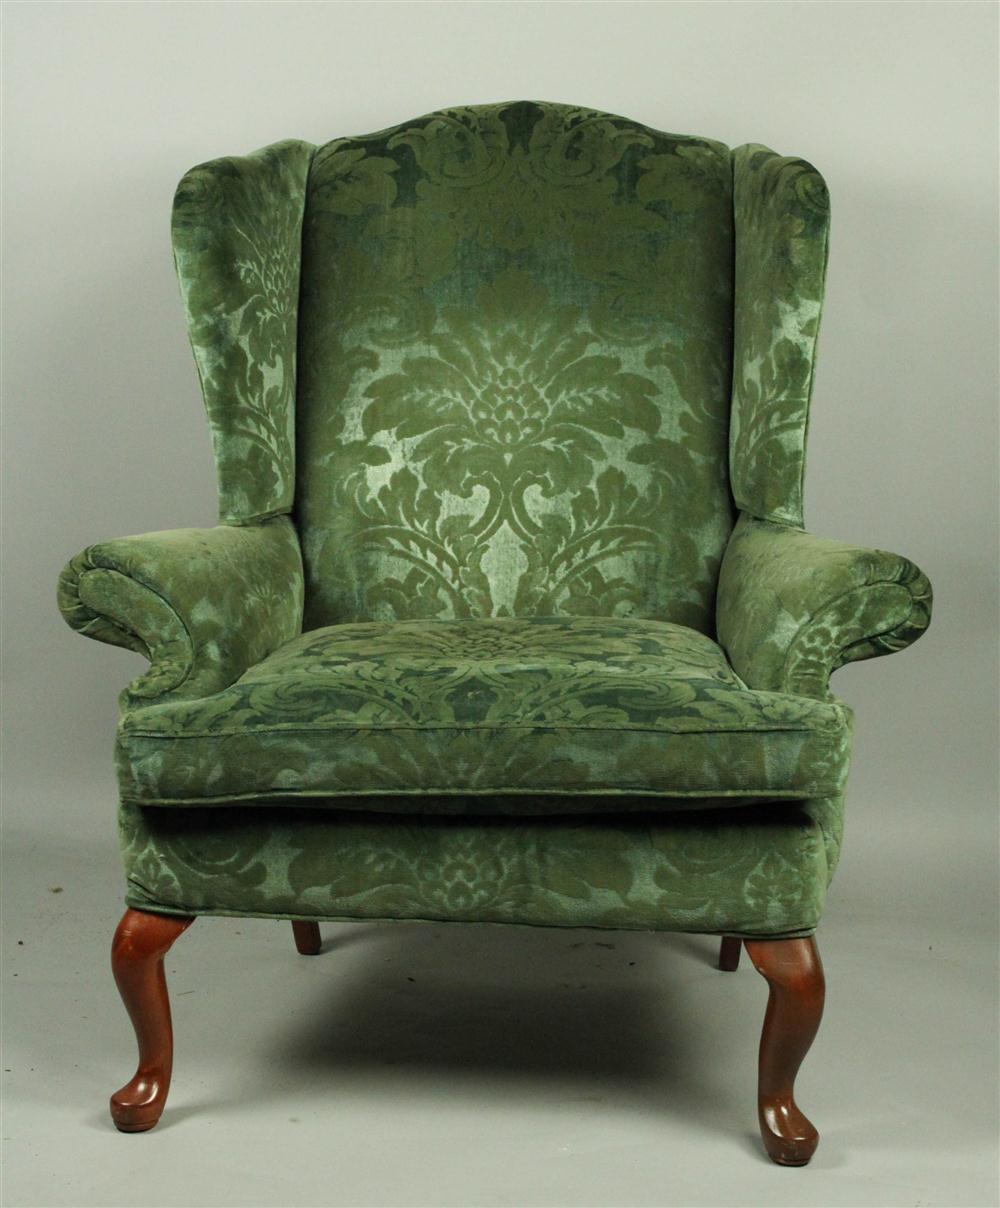 QUEEN ANNE STYLE UPHOLSTERED MAHOGANY